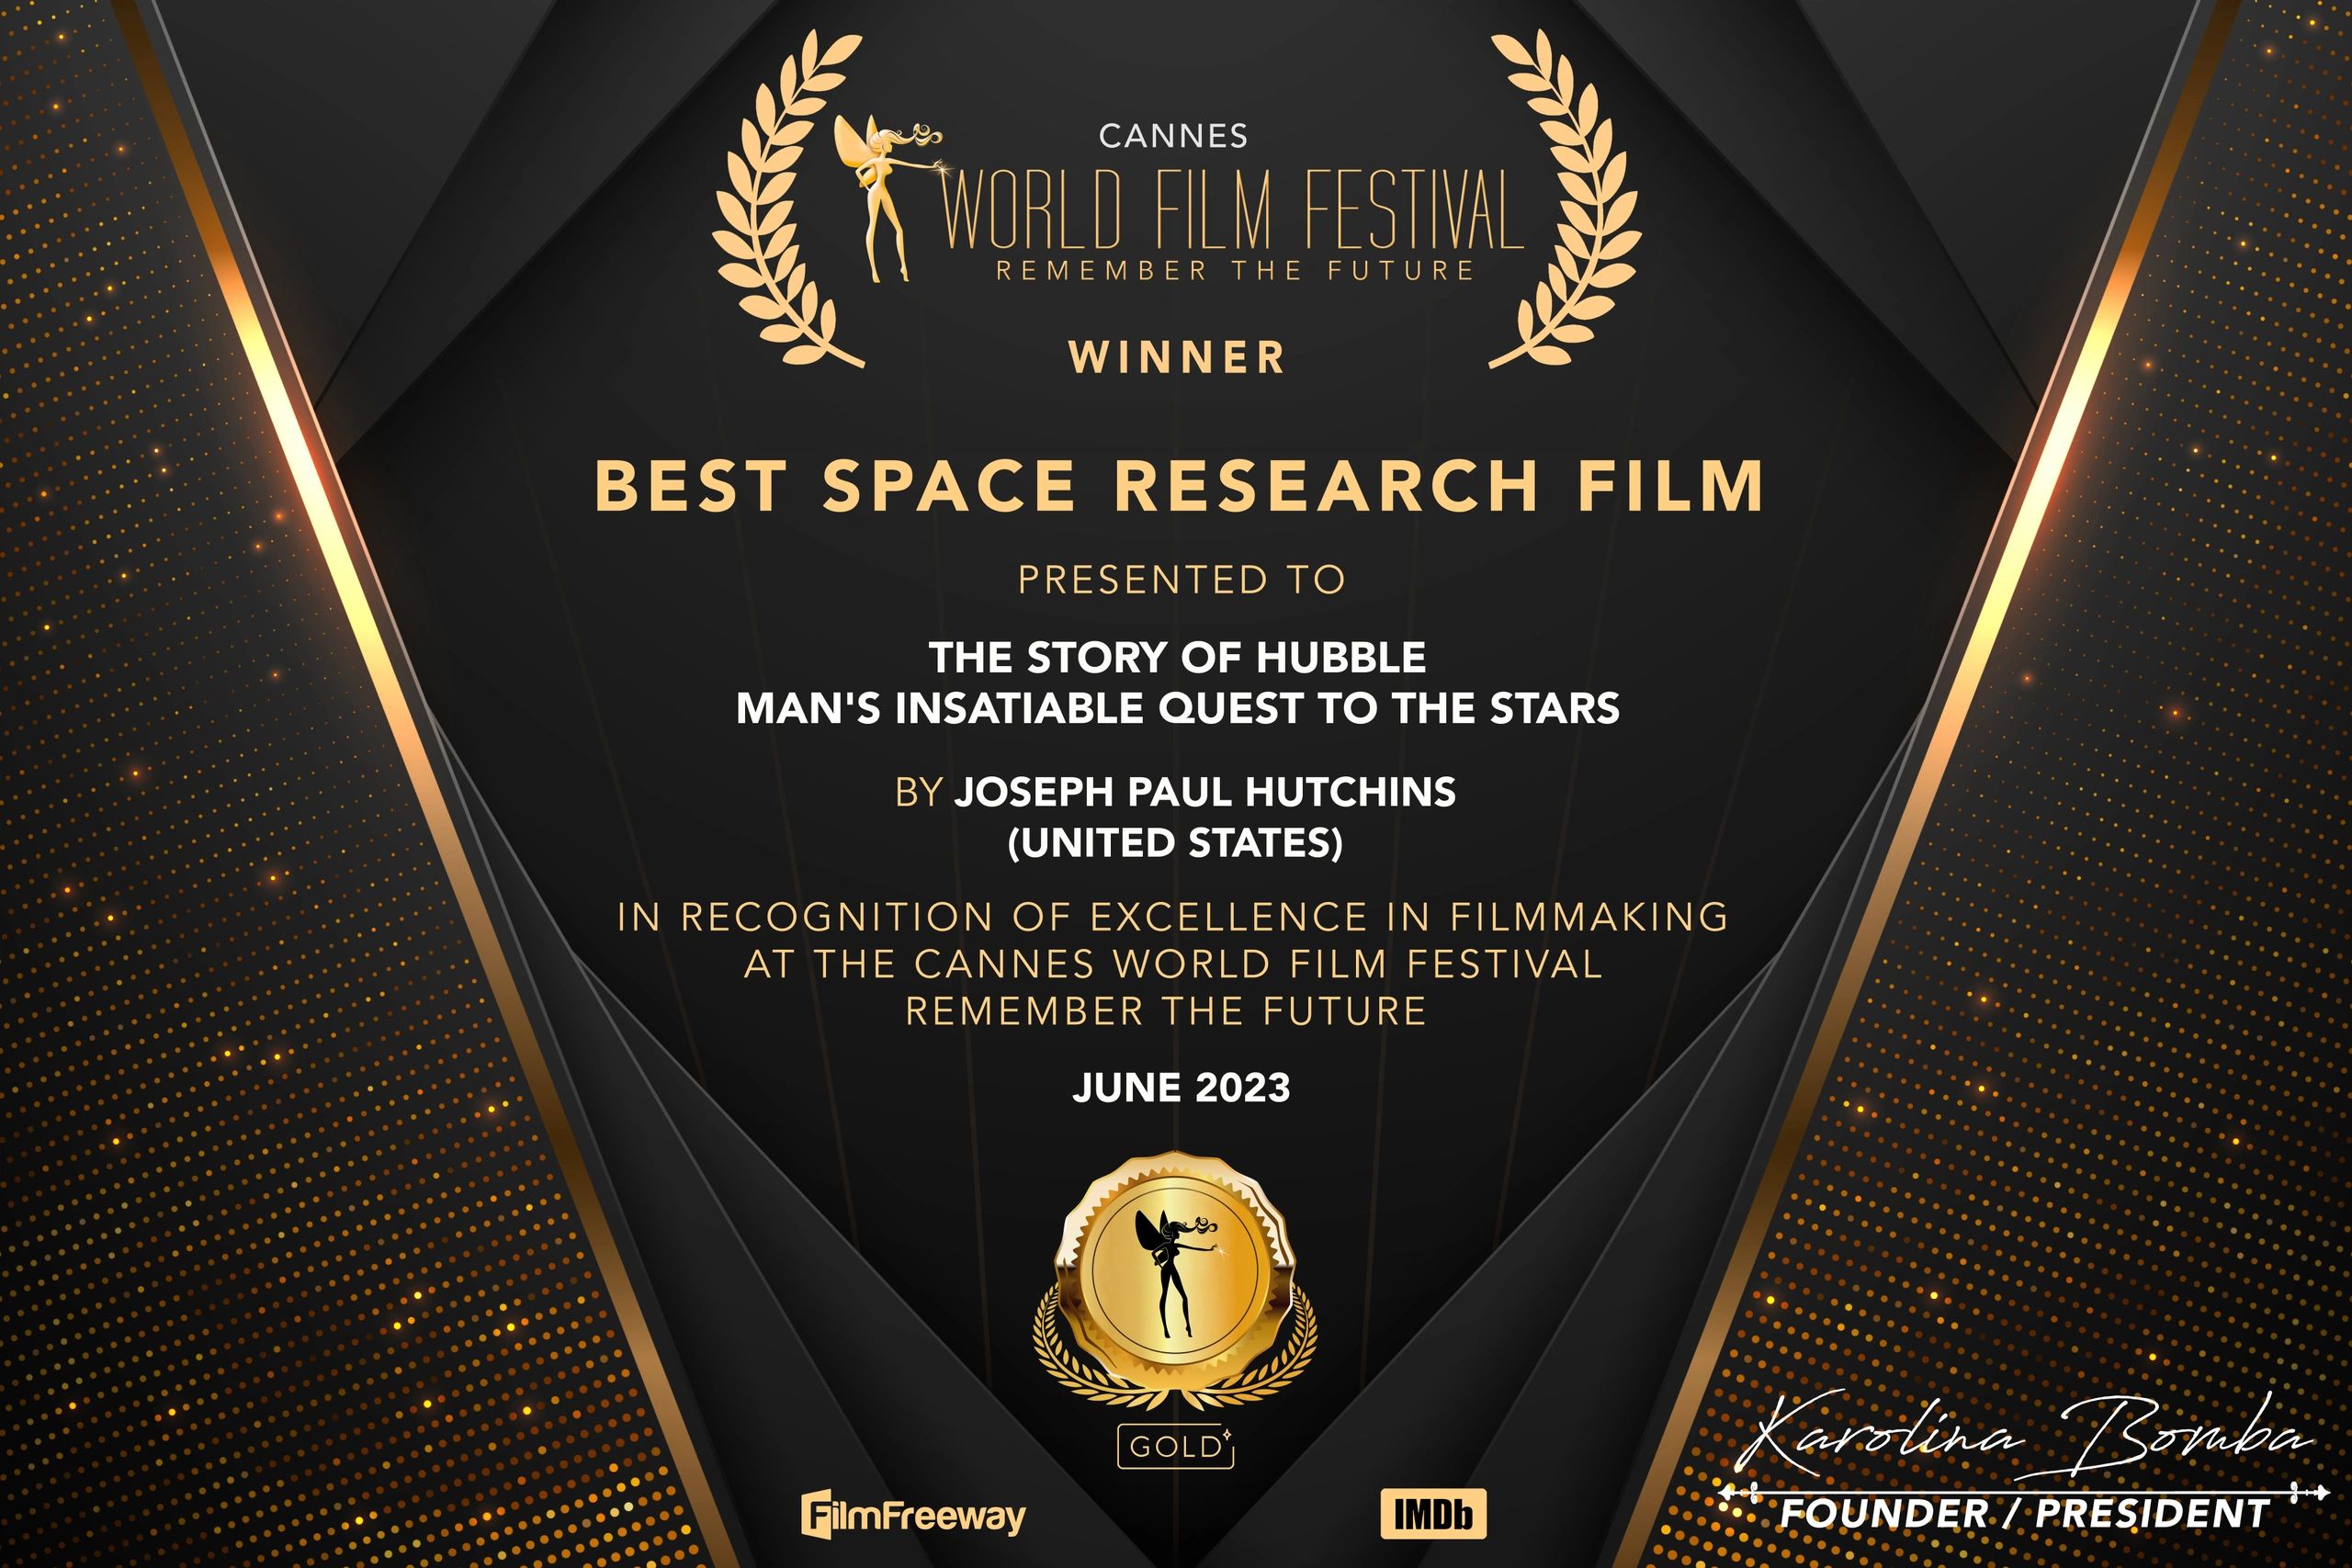 Cannes Film Festival award for "The Story of Hubble Movie"